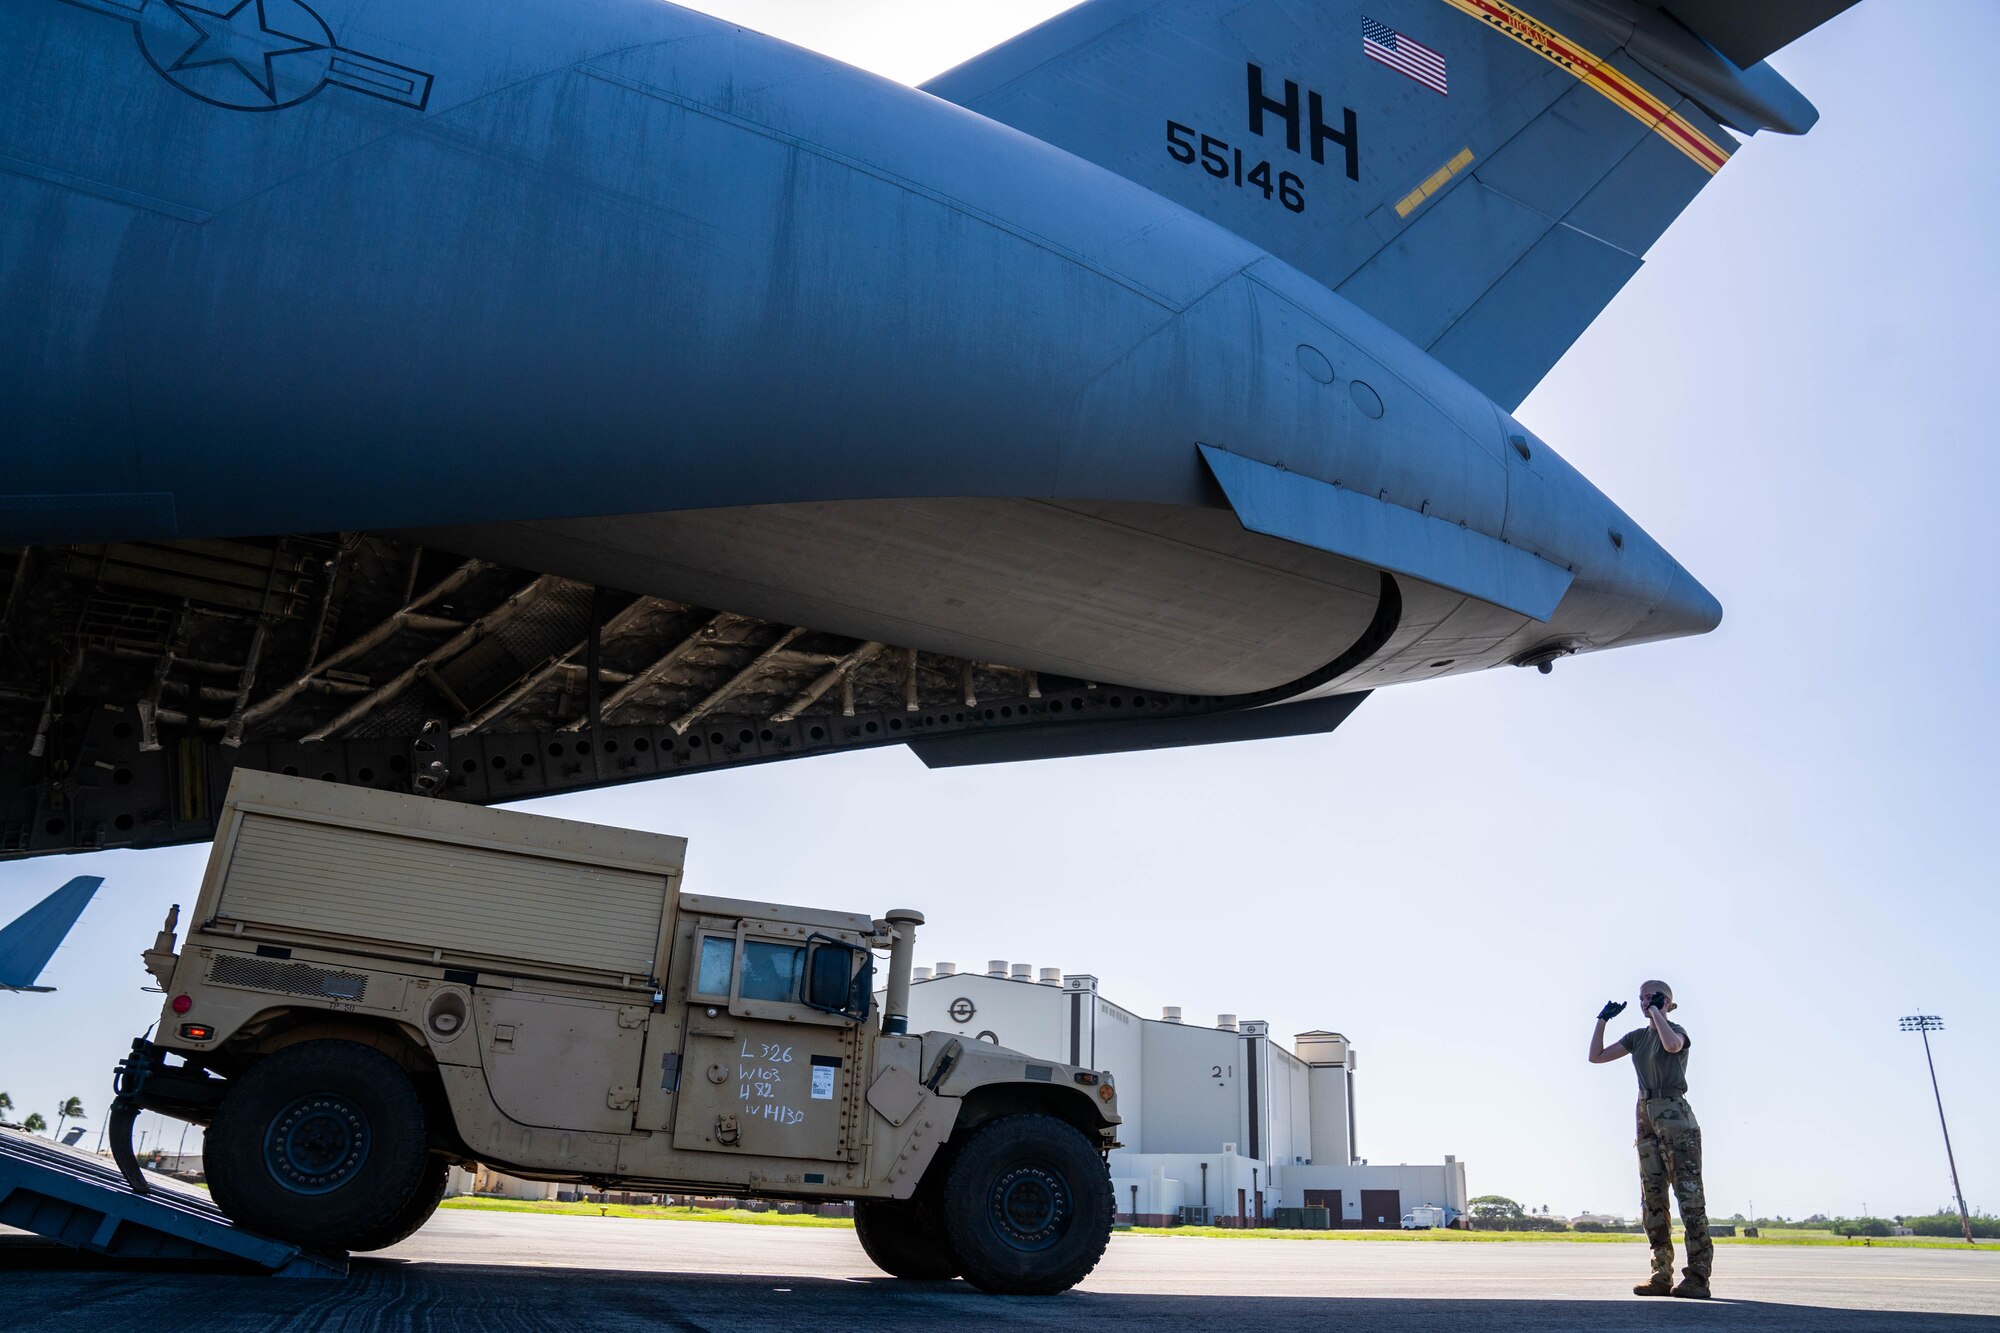 Senior Airman Maya France, 535 Airlift Squadron loadmaster, directs a Joint Light Tactical Vehicle onto a C-17 Globemaster III during an exercise at Joint Base Pearl Harbor-Hickam, Hawaii, Jan. 10, 2022. Loadmasters direct and secure cargo while working hand-in-hand with joint and total force partners to ensure a free and open Indo-Pacific. (U.S. Air Force photo by Airman 1st Class Makensie Cooper)